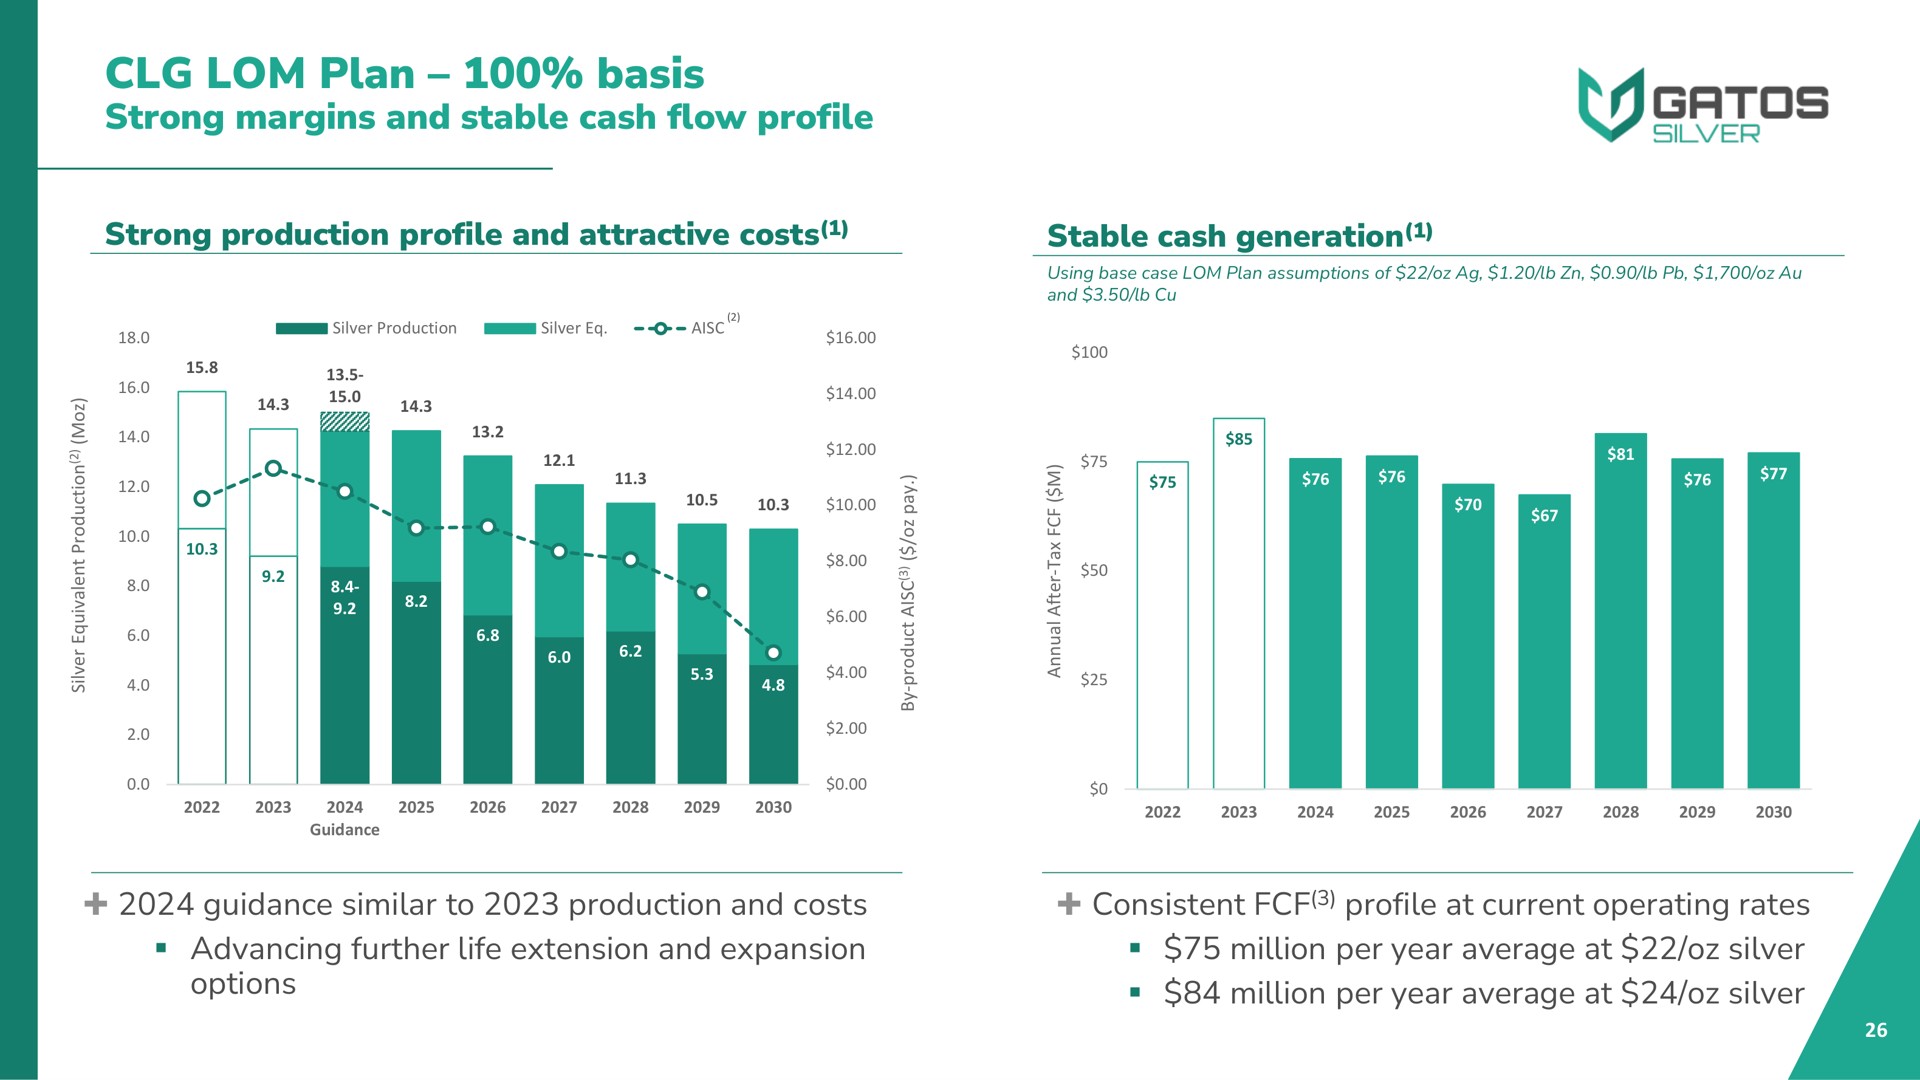 plan basis strong margins and stable cash flow profile | Gatos Silver